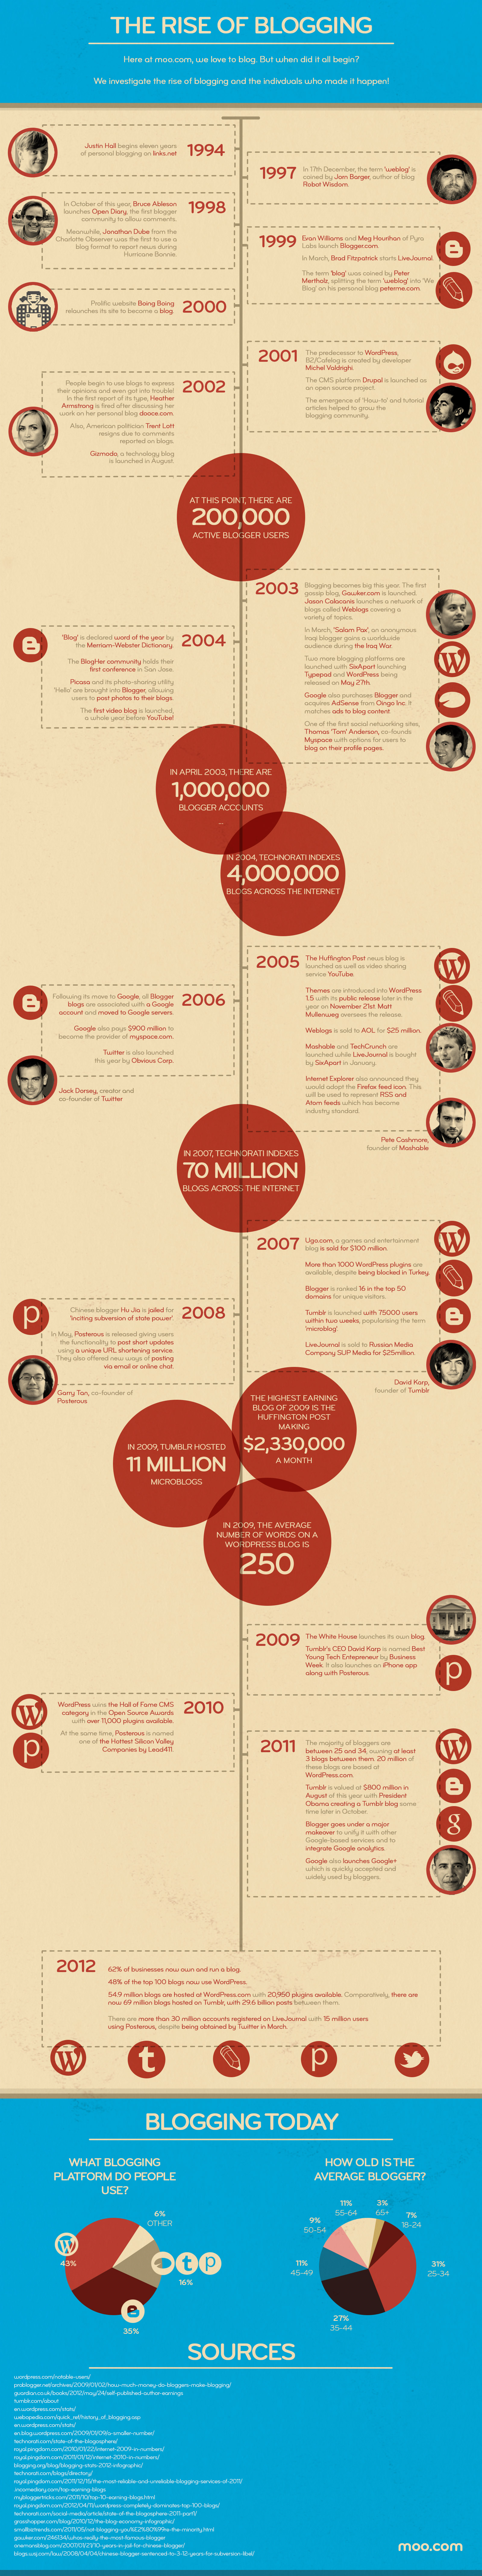 The Rise of Blogging